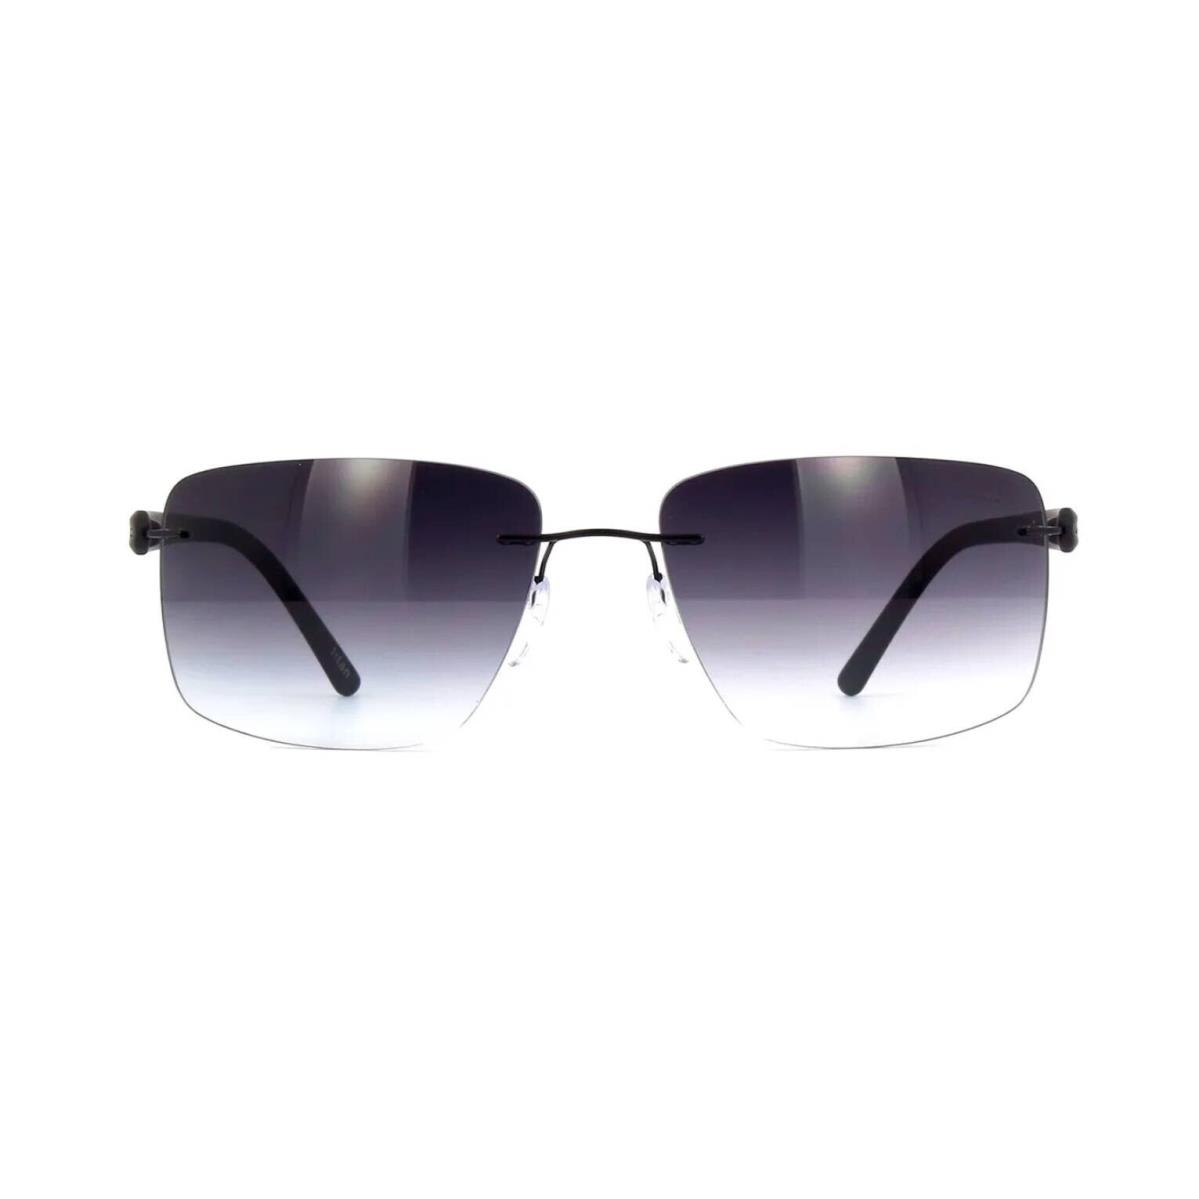 Silhouette Carbon T1 8722 Black/grey Shaded Mirror 9140 Sunglasses